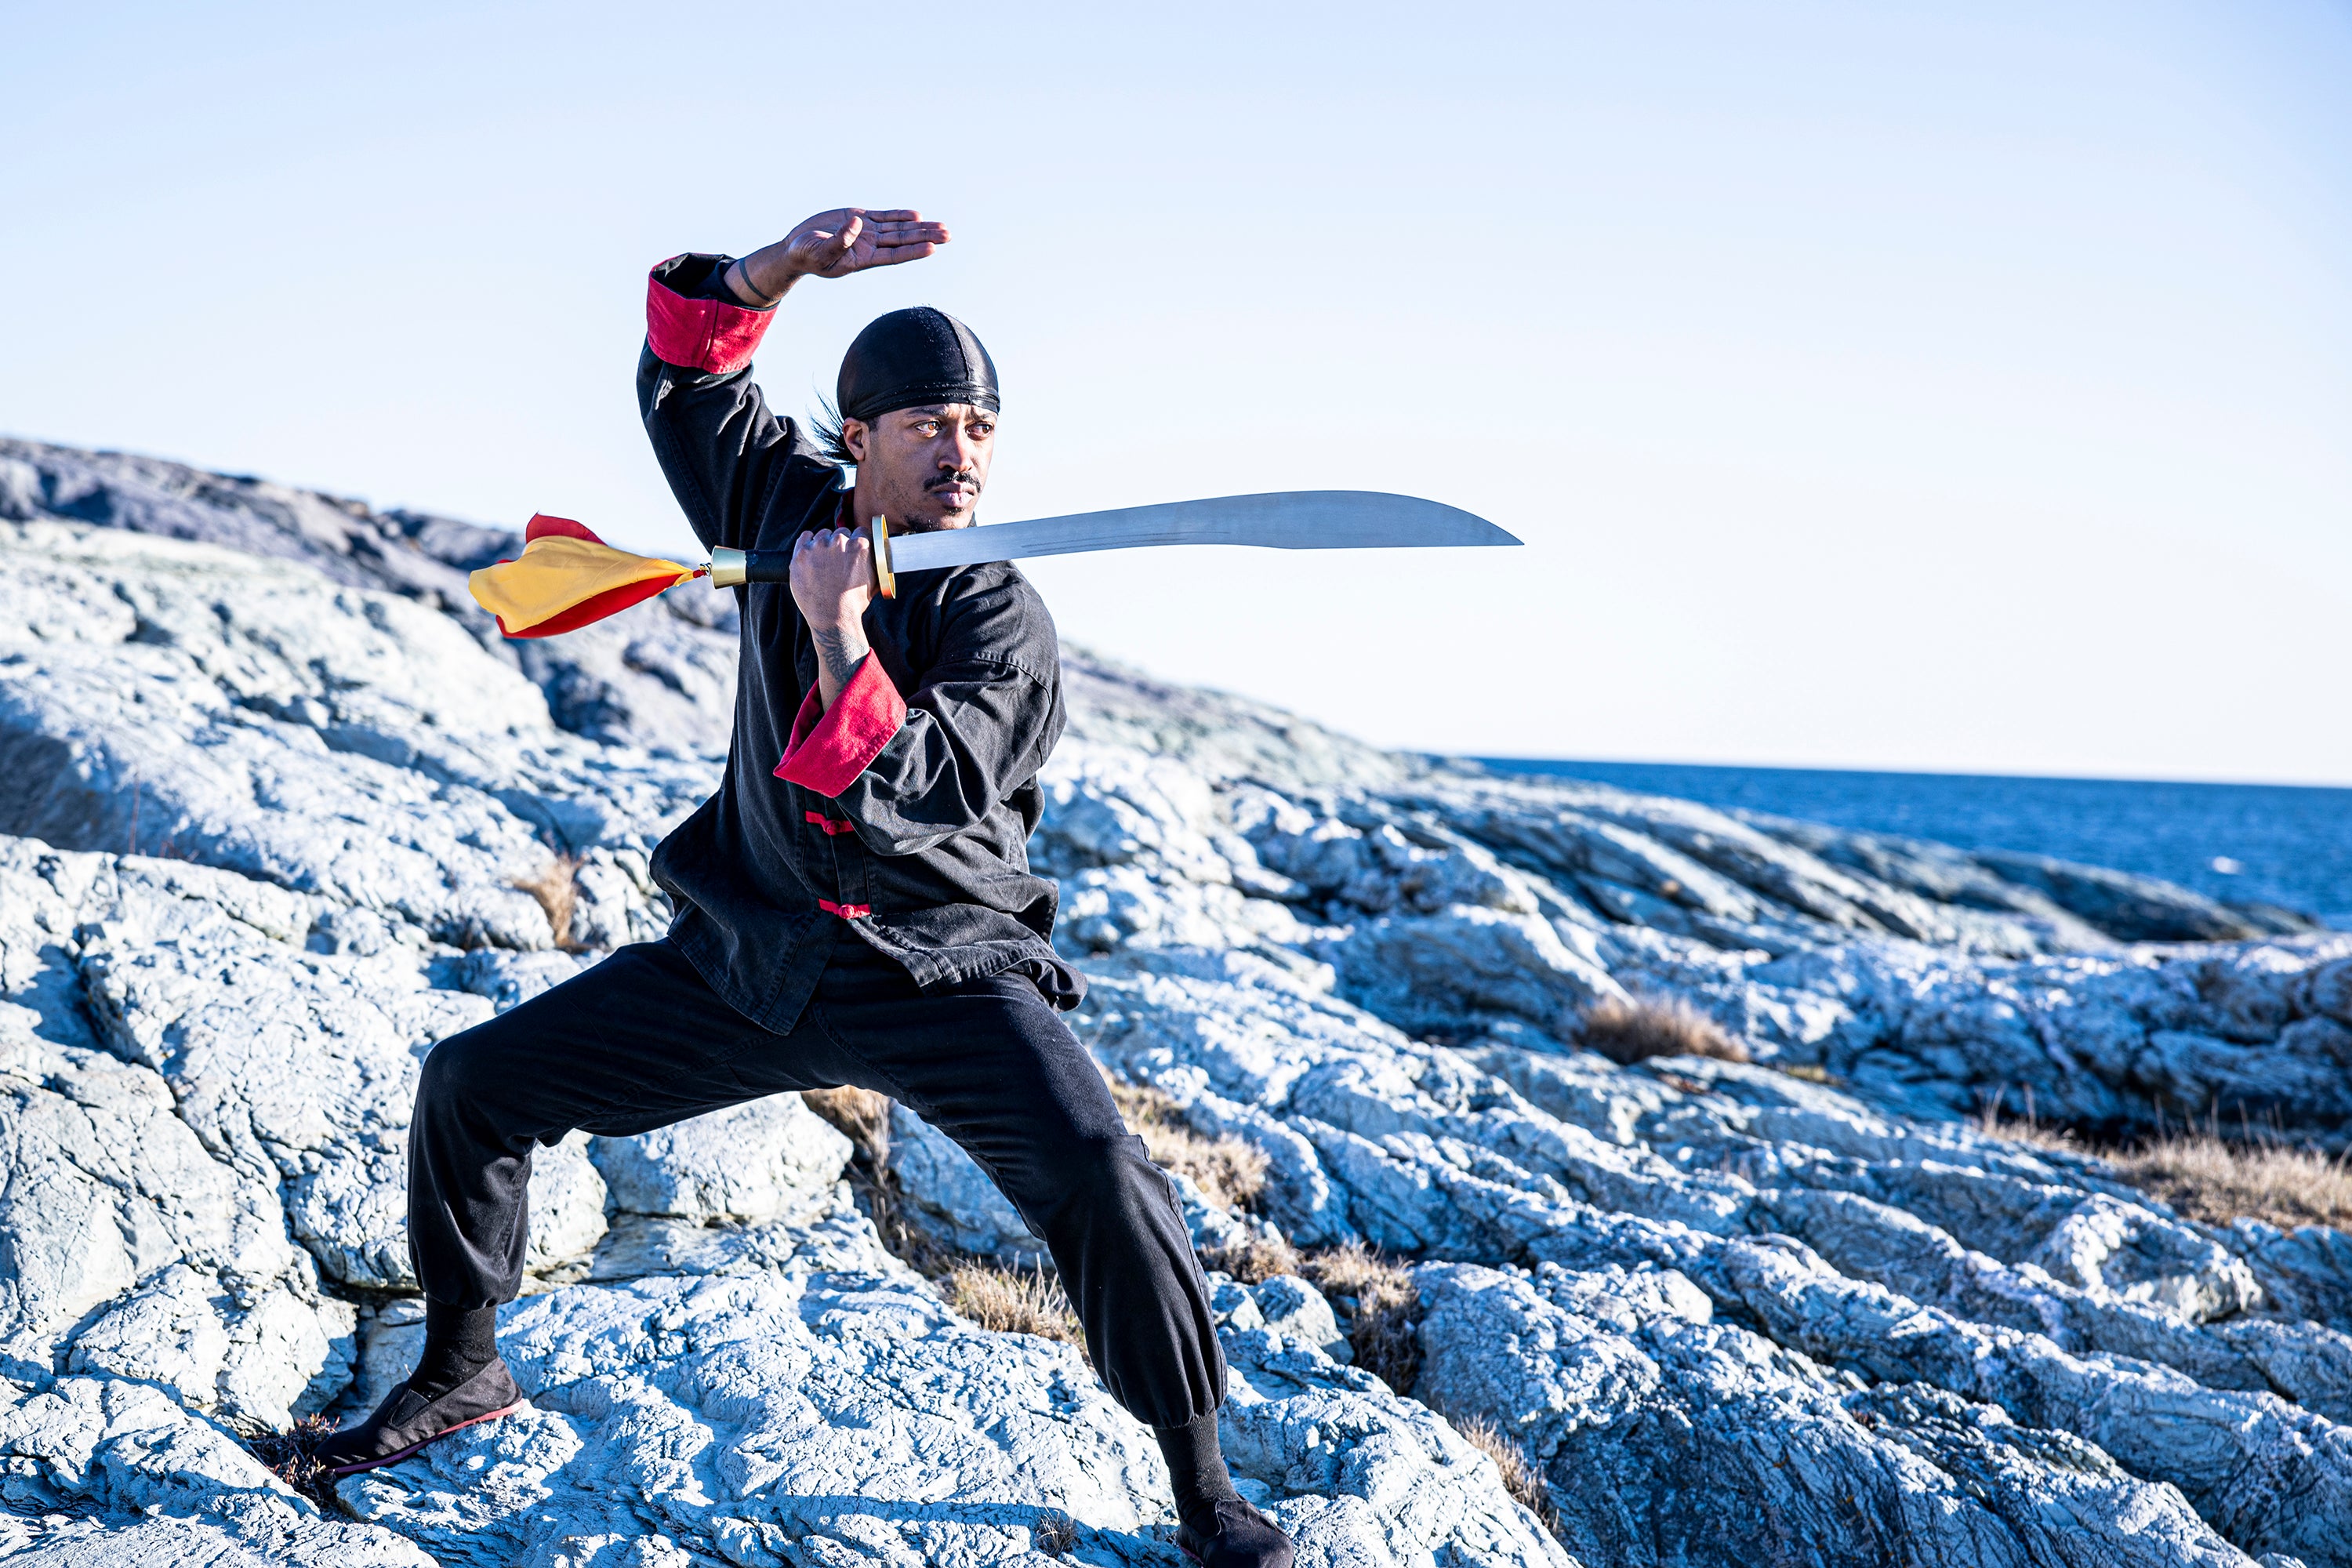 Rob Campbell with sword and in Kung Fu uniform on rocks near beach